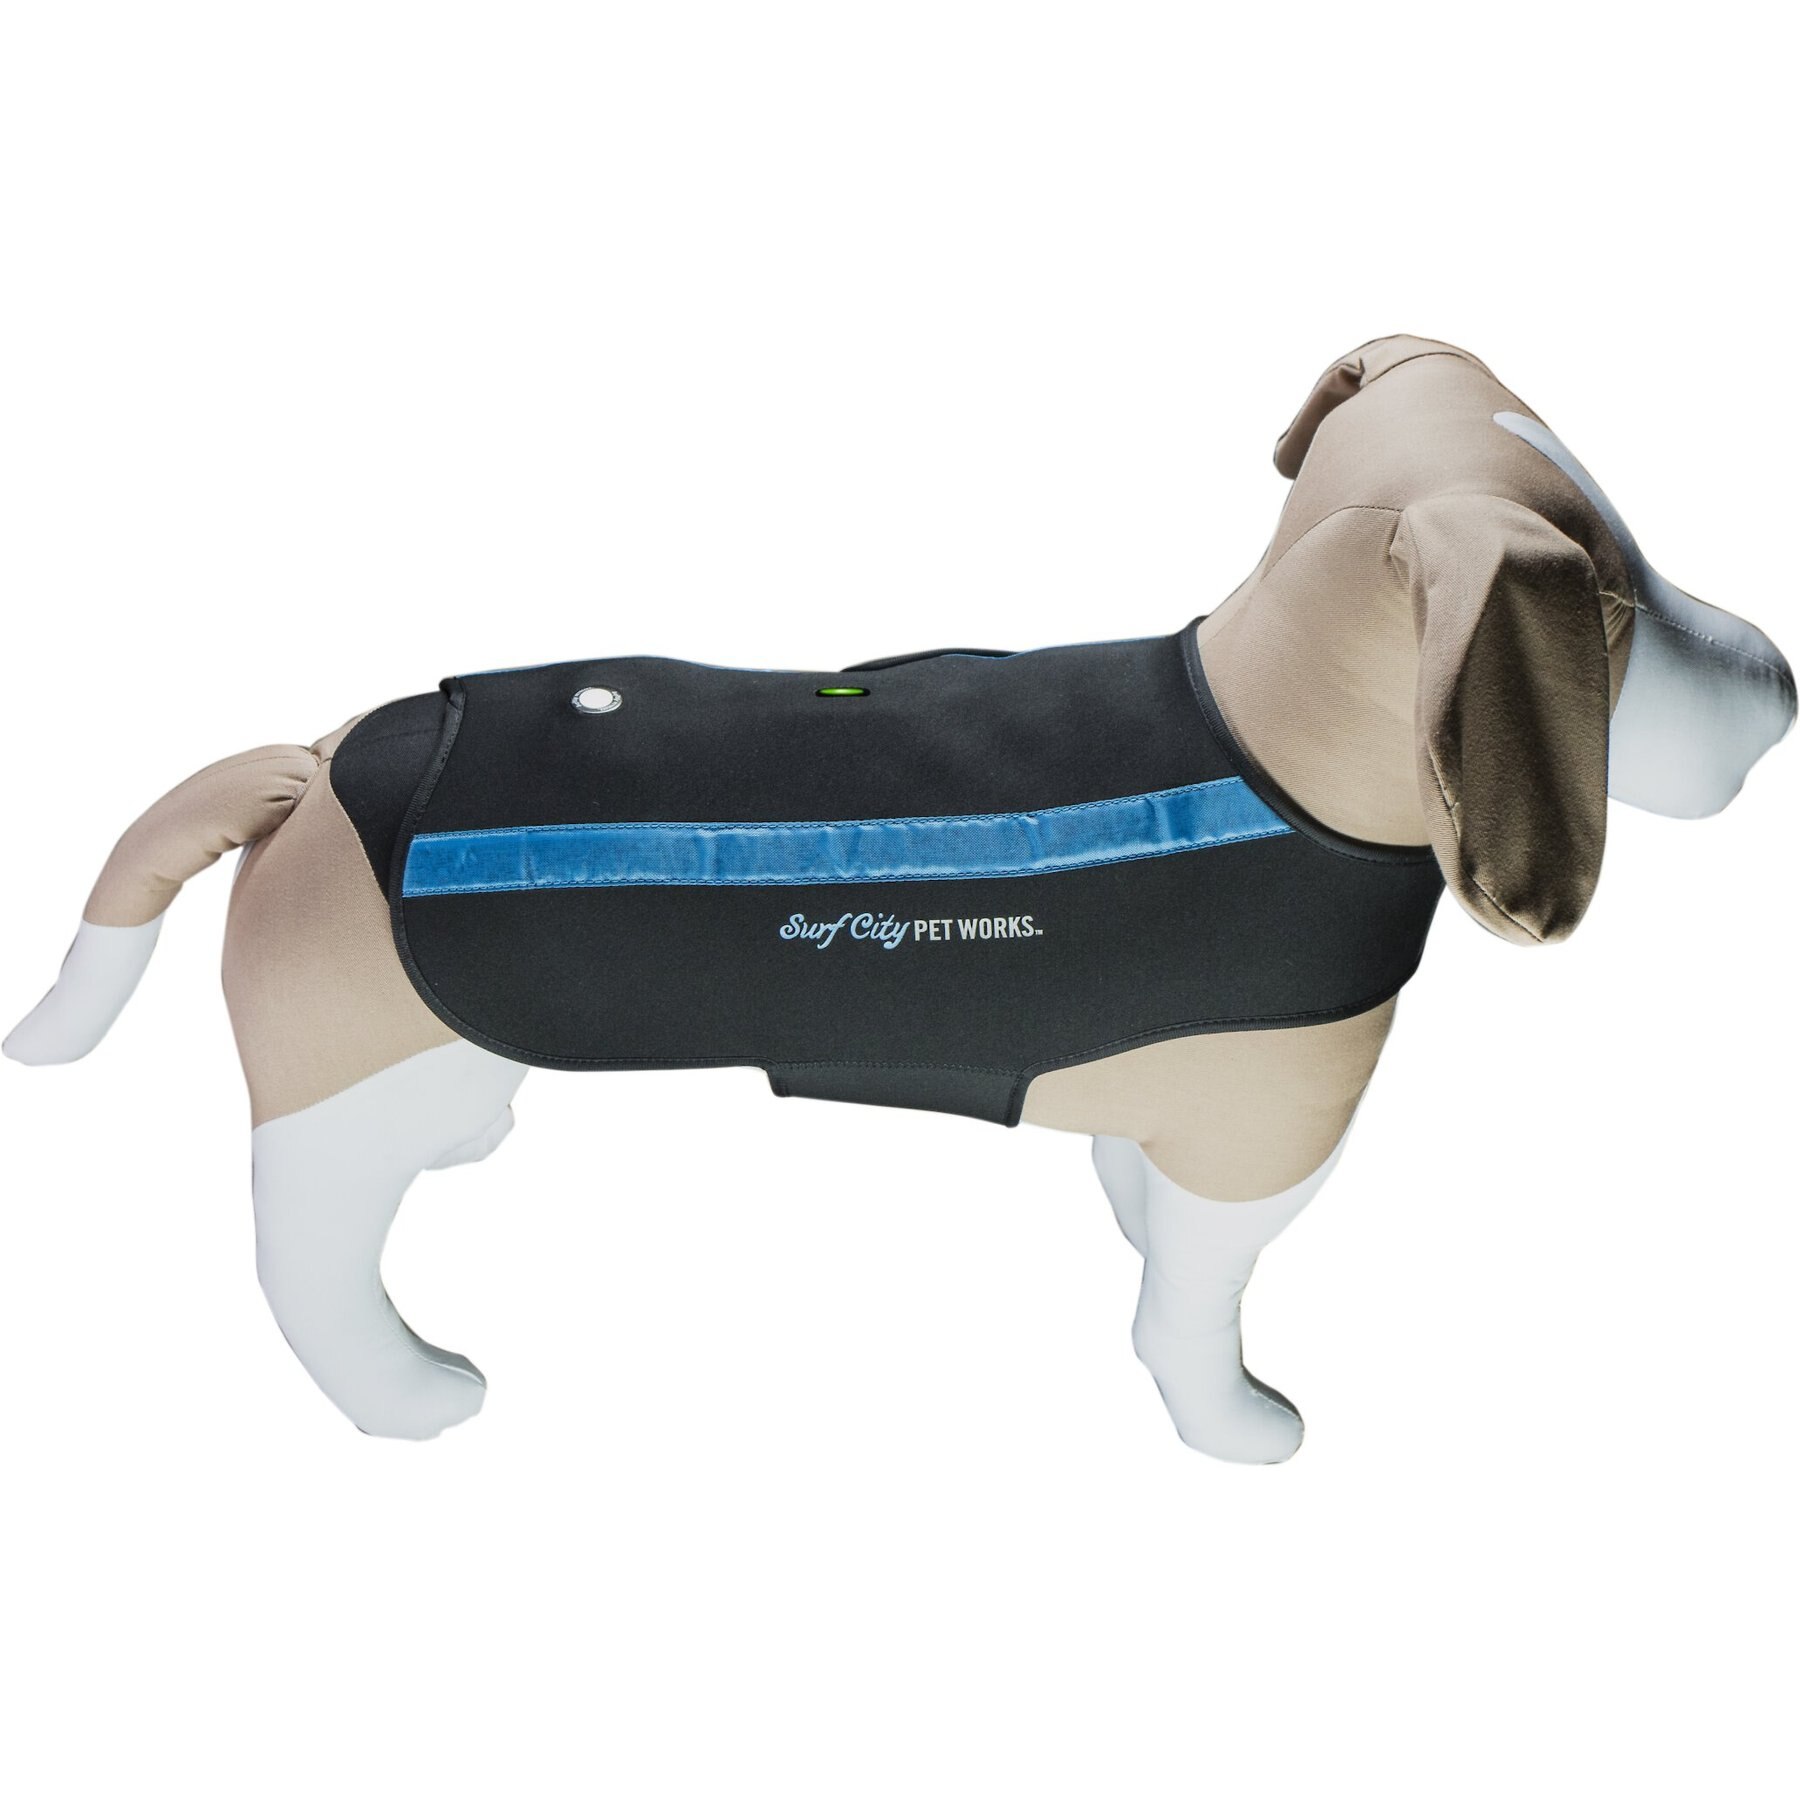 Surf City Pet Works Anxiety Vest for Dogs, Black, Medium